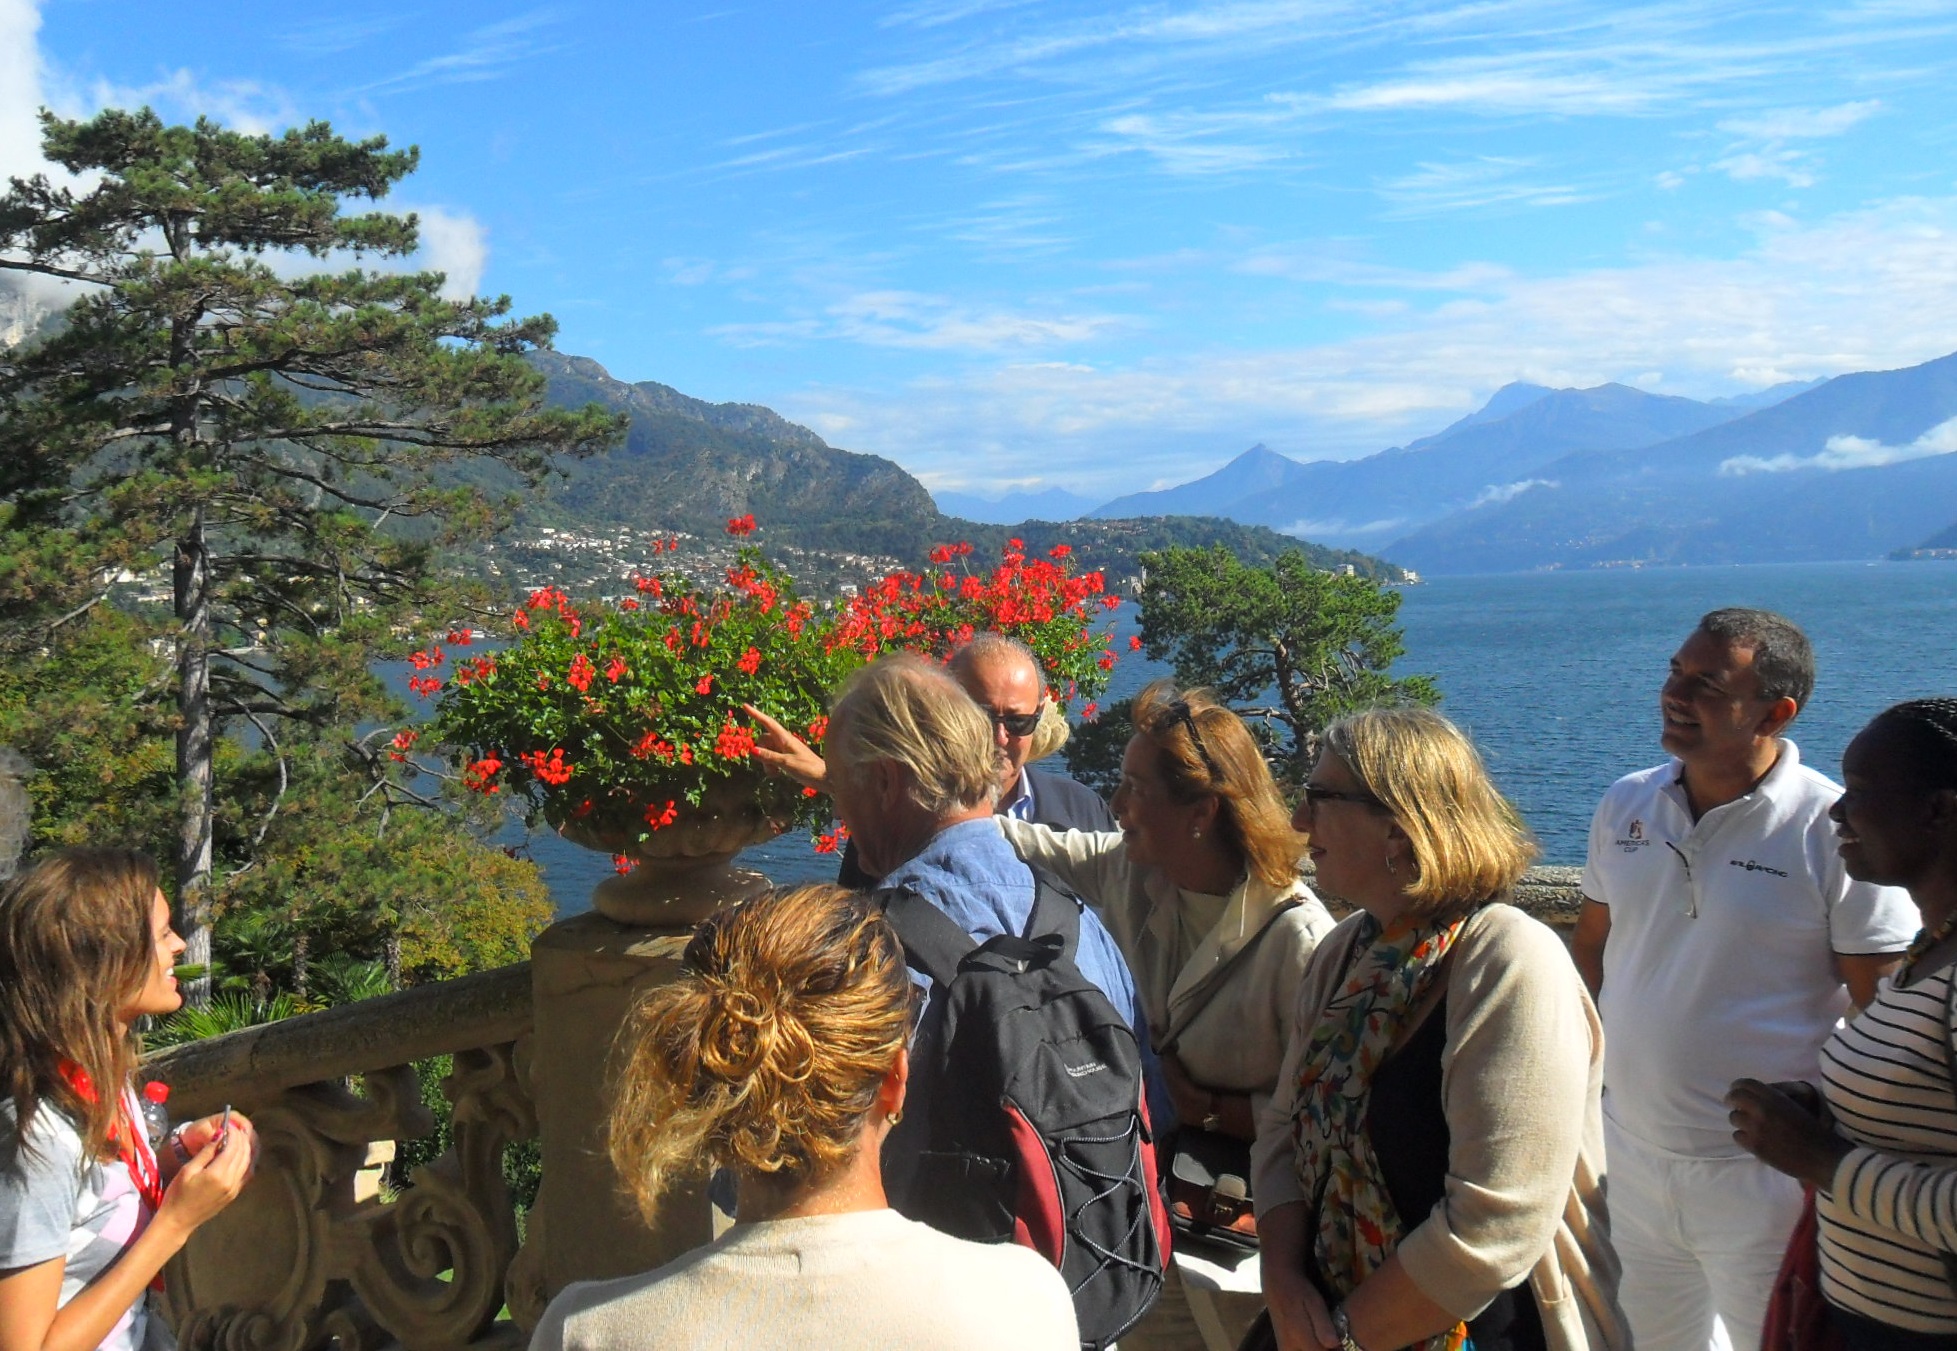 Members of the INTO team on a site visit to Balbianello